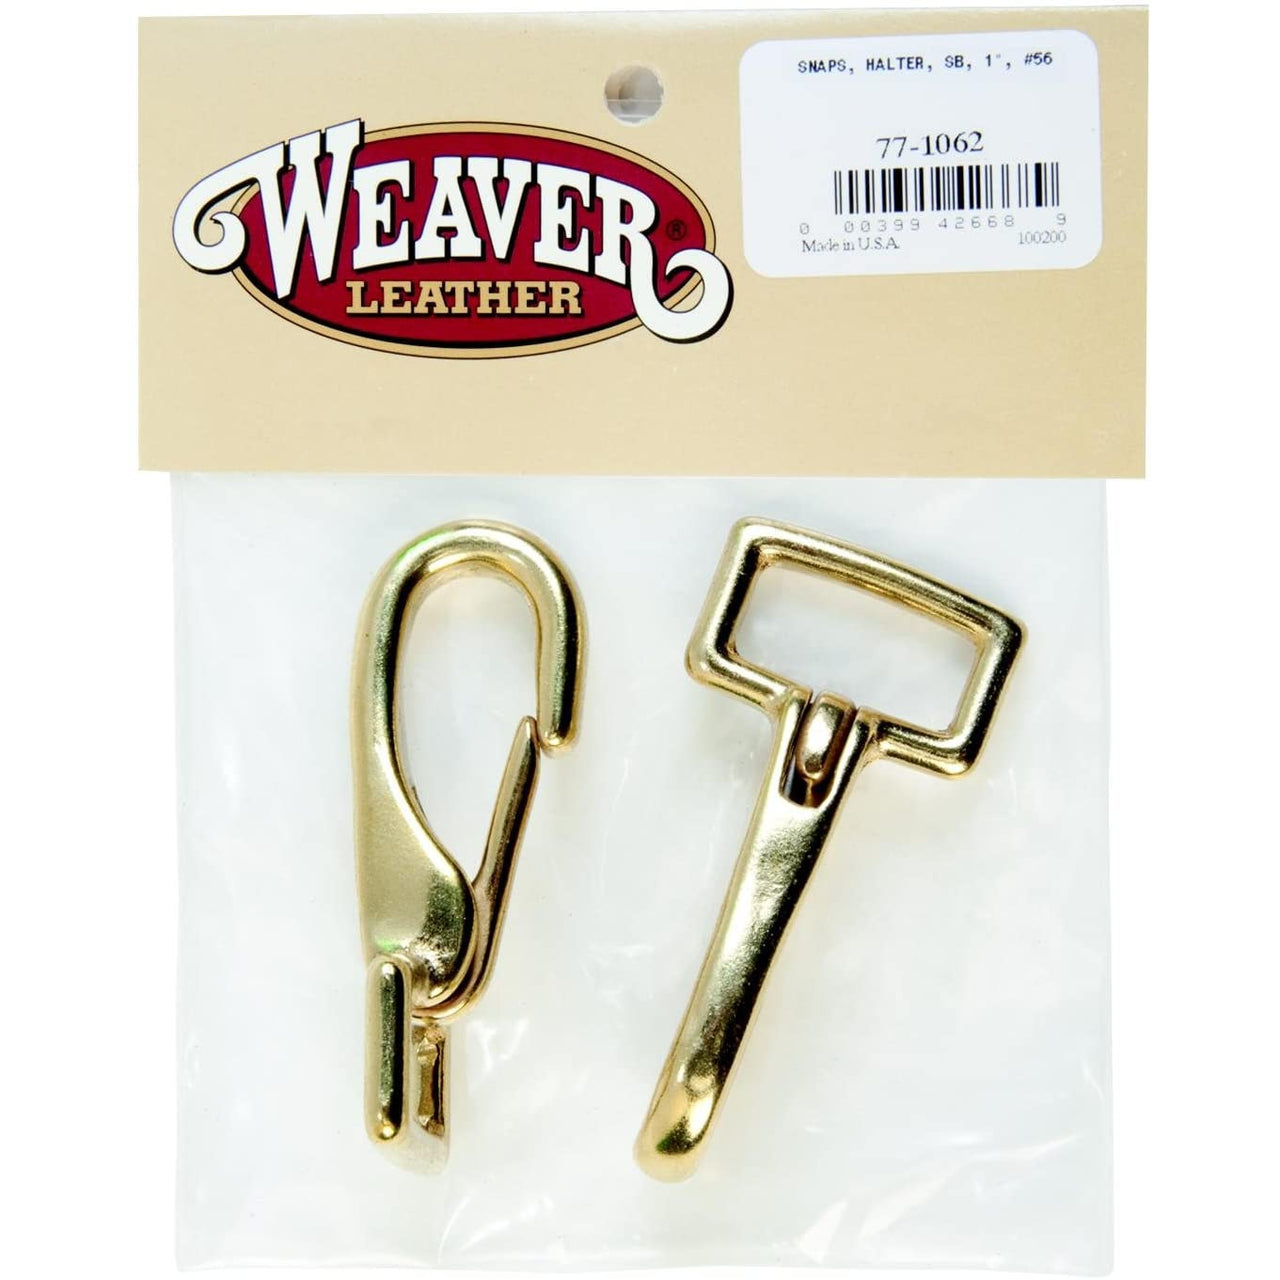 Weaver Leather Bagged 56 Snaps Solid Brass 1"